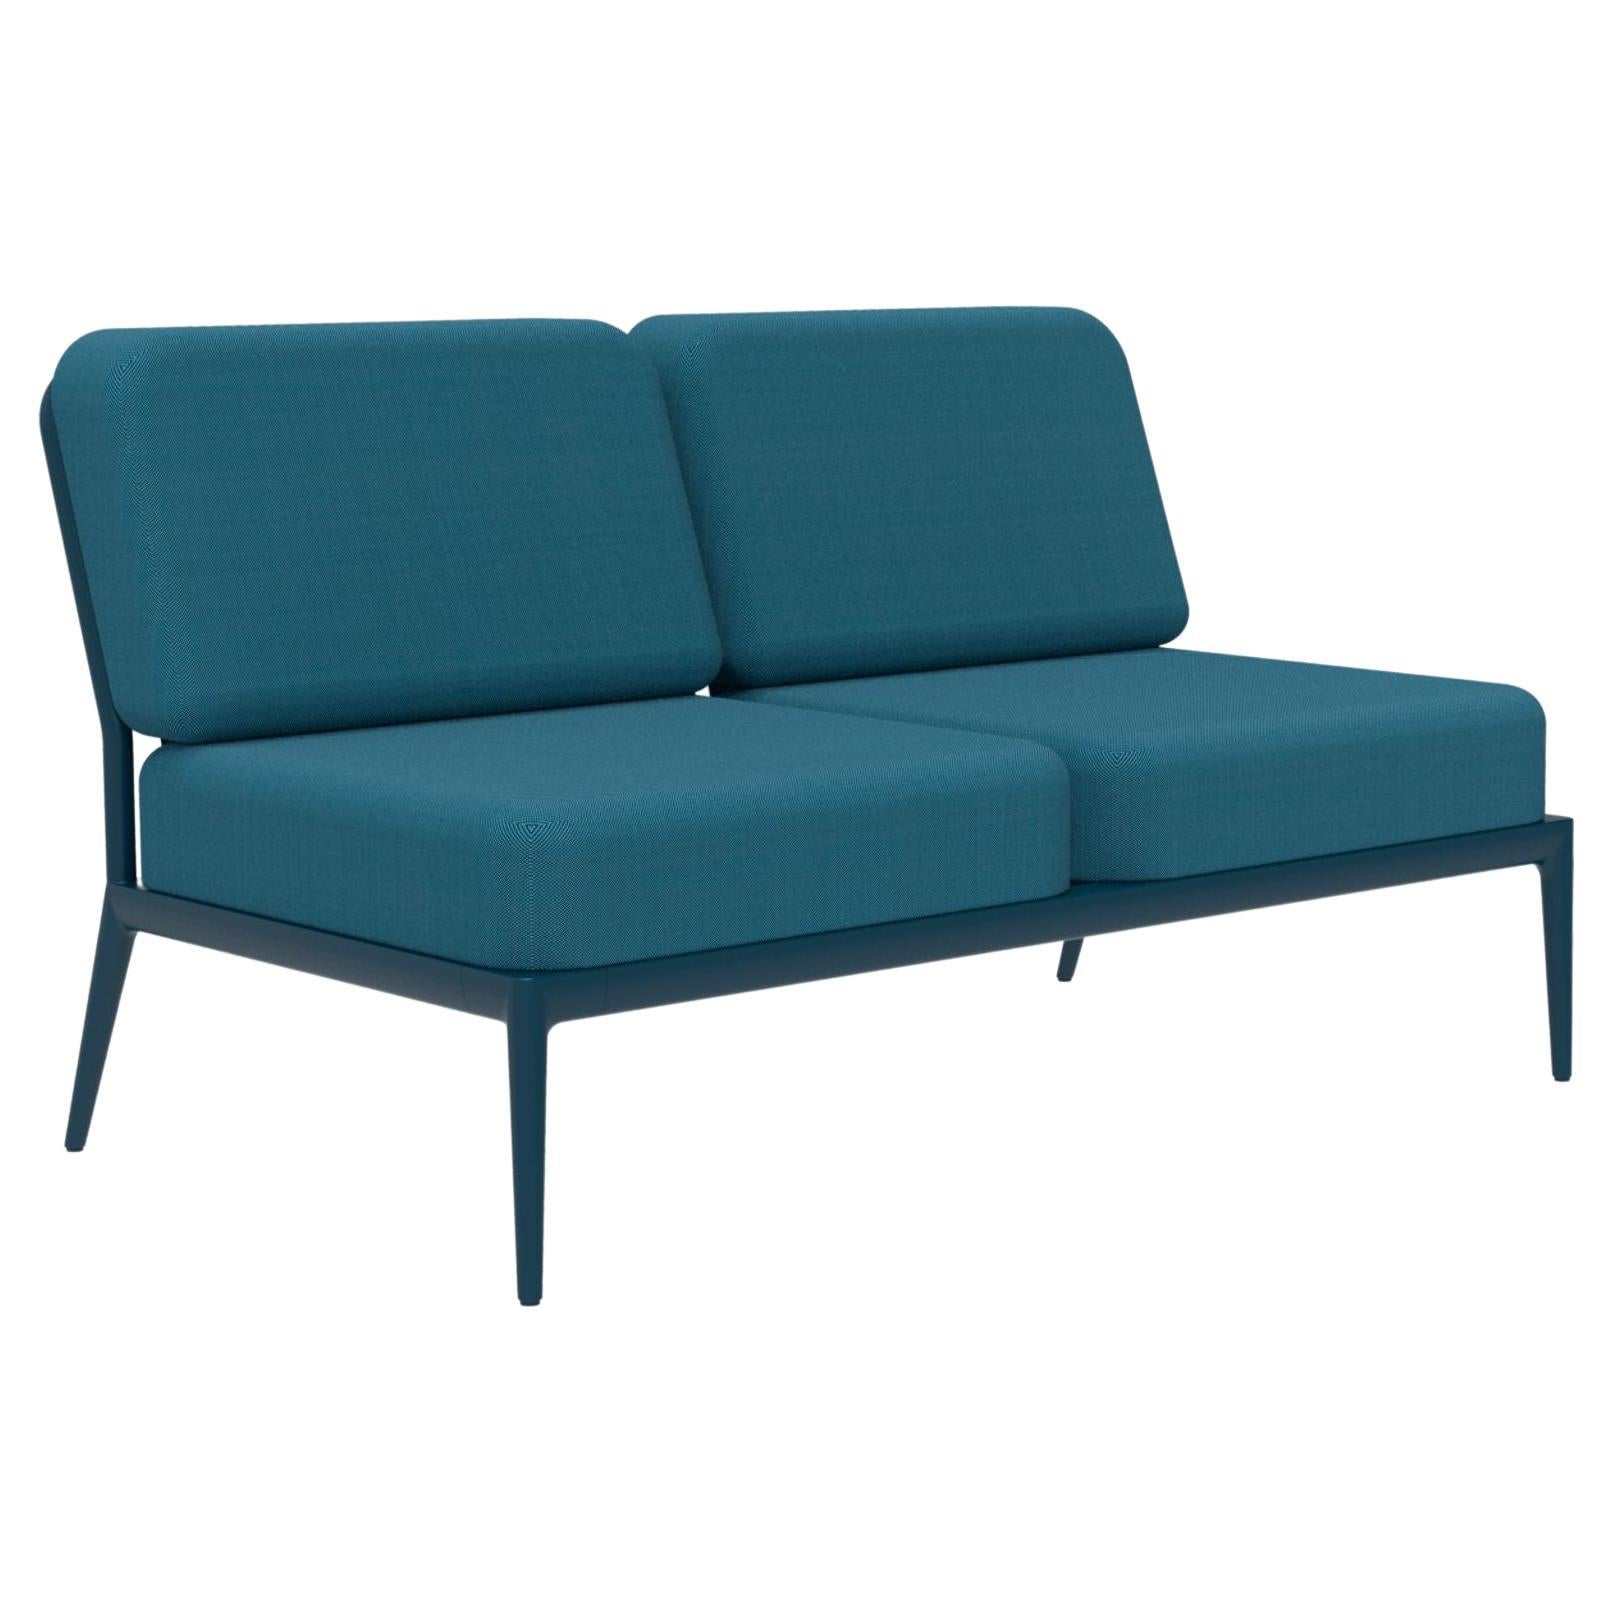 Ribbons Navy Double Central Modular Sofa by Mowee For Sale